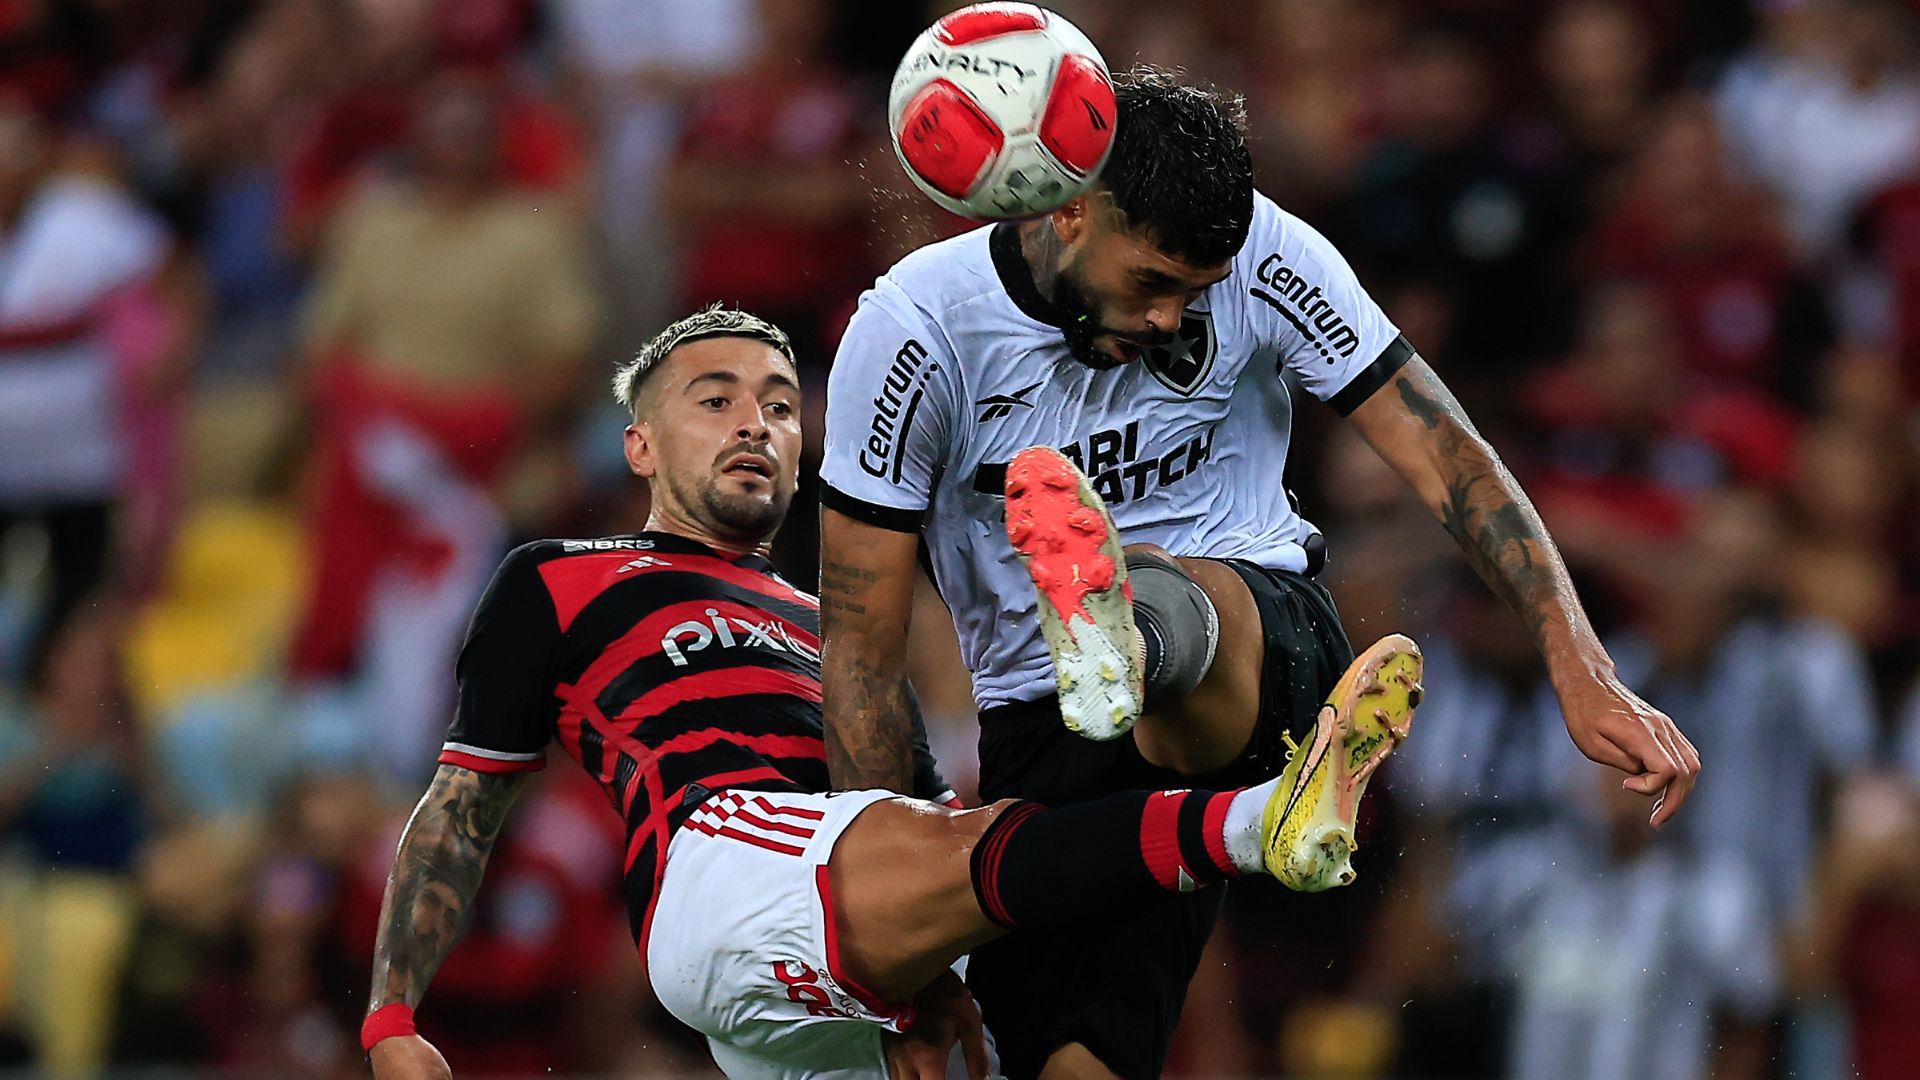 Arrascaeta in action against Botafogo (Credit: Getty Images)